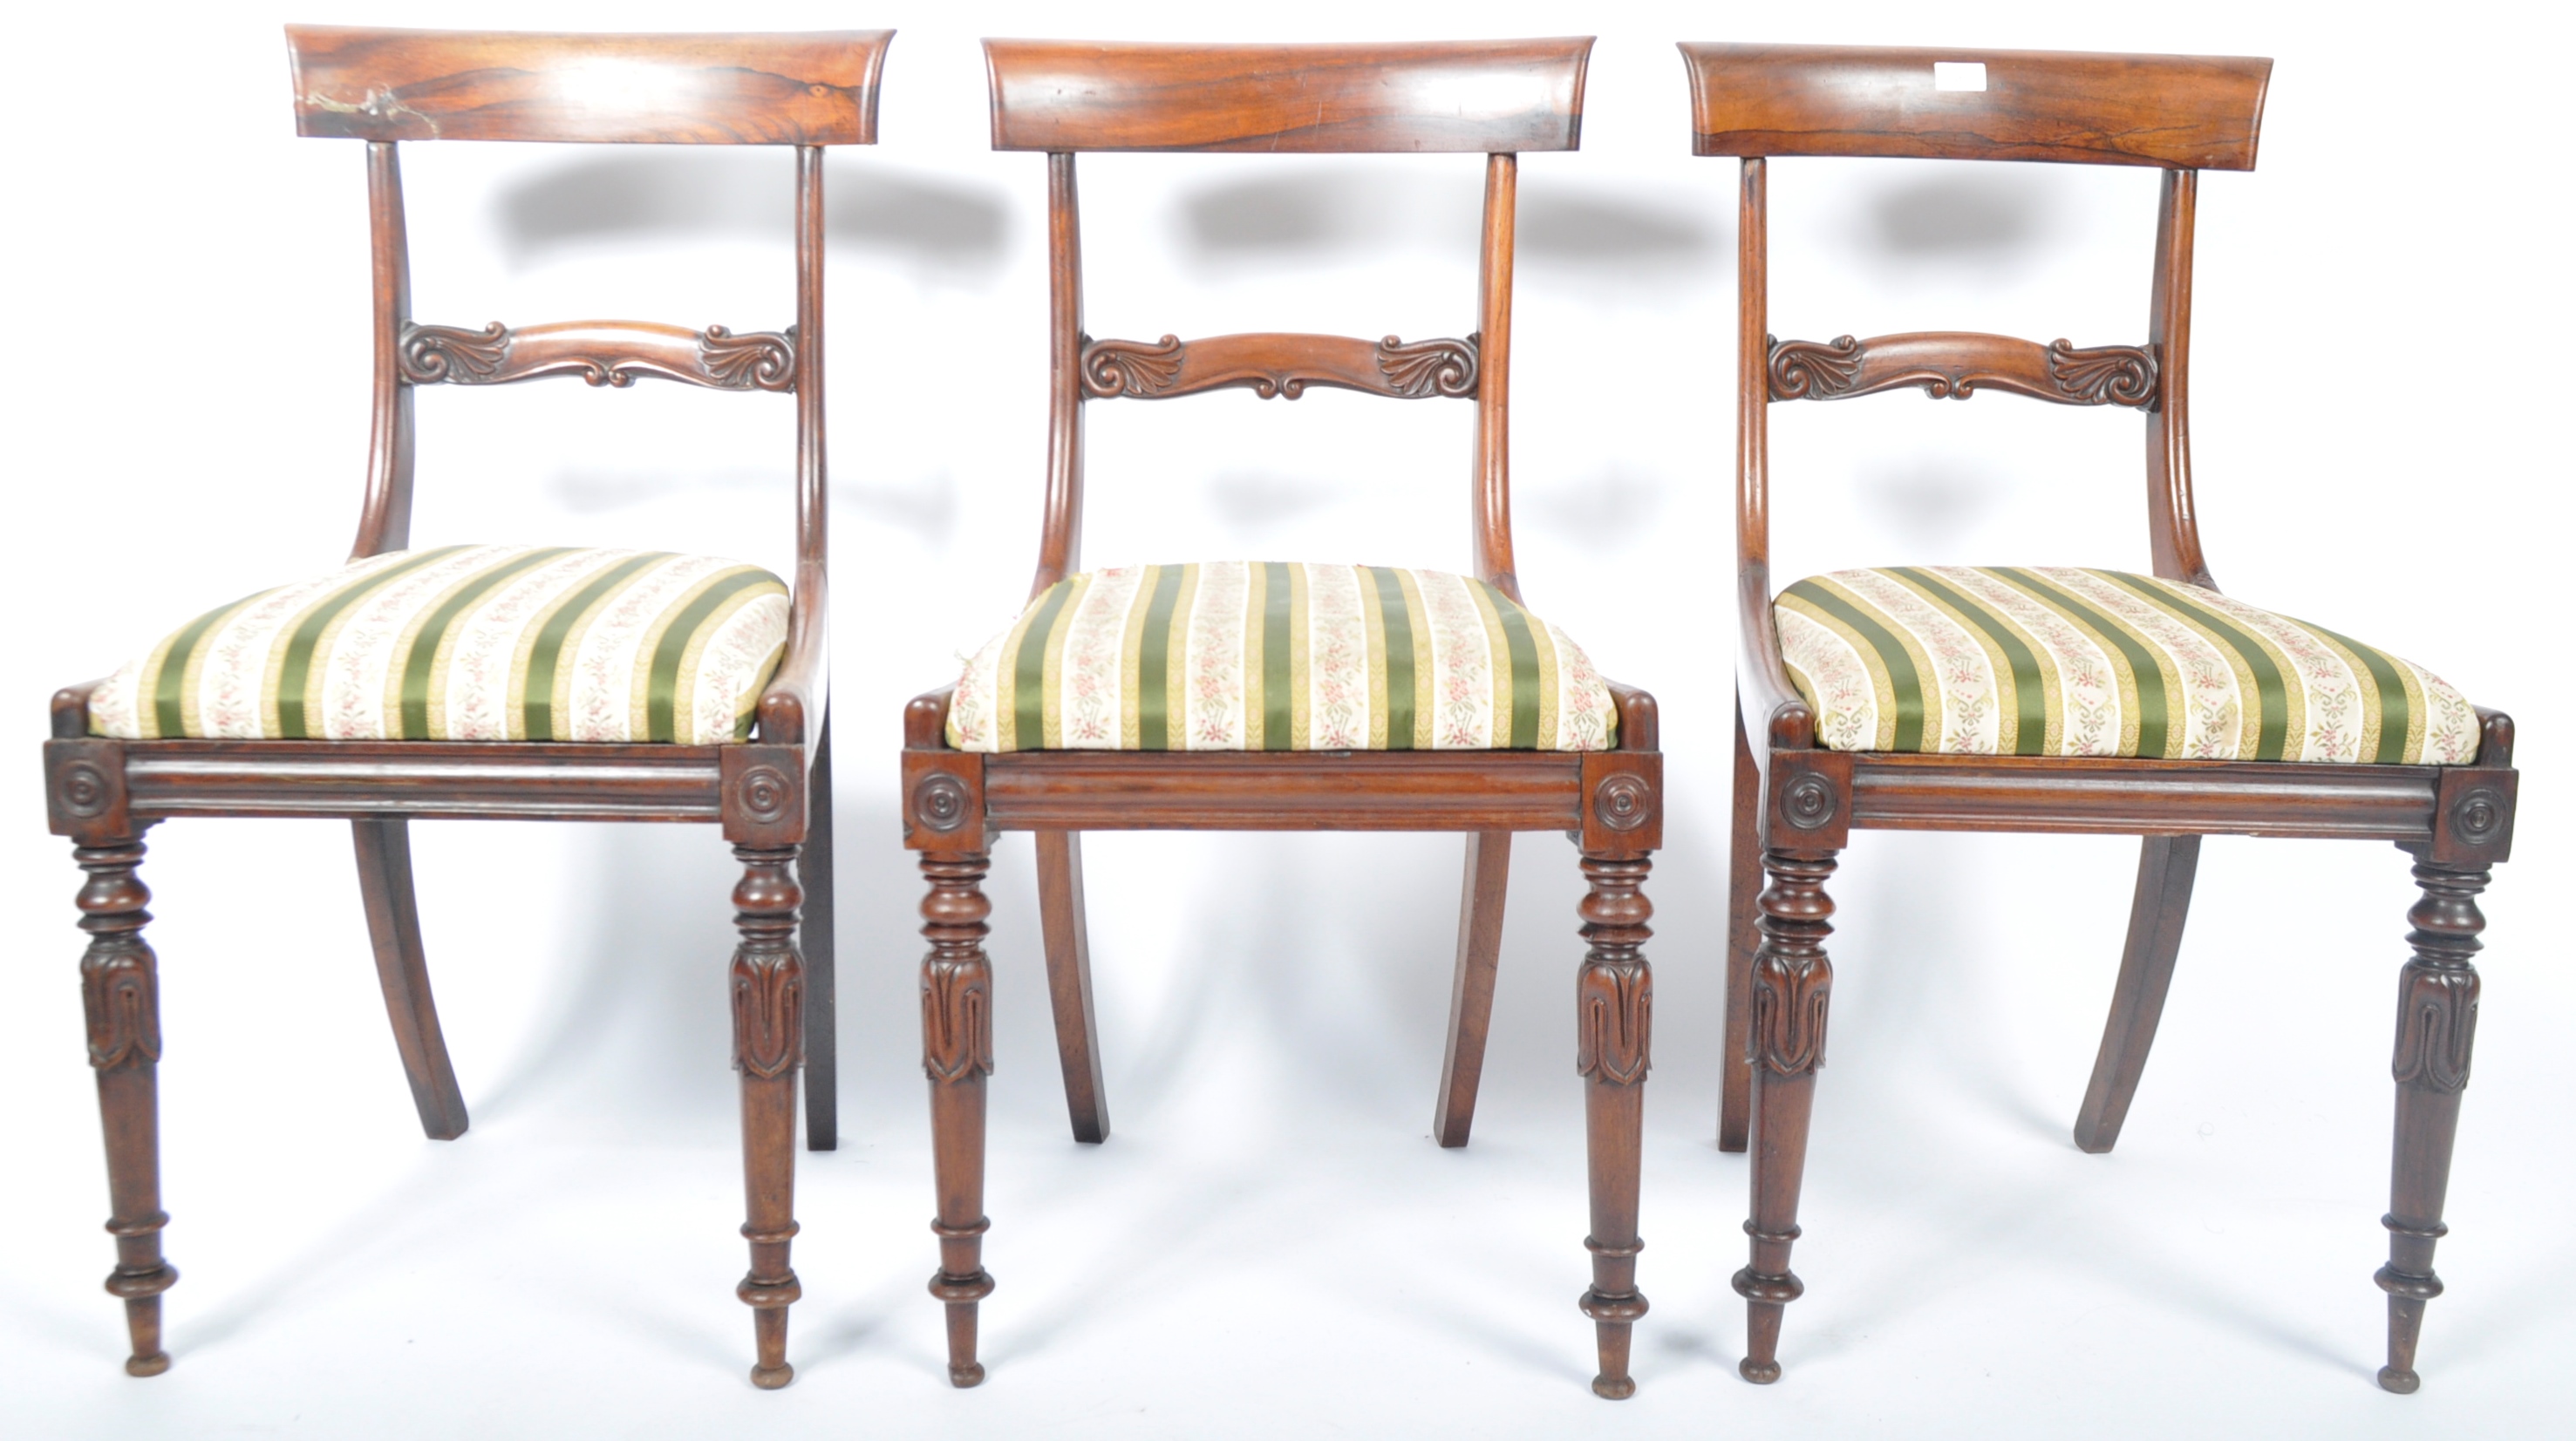 SIX 19TH CENTURY ROSEWOOD DINING CHAIRS IN THE GILLOWS MANNER - Image 4 of 11